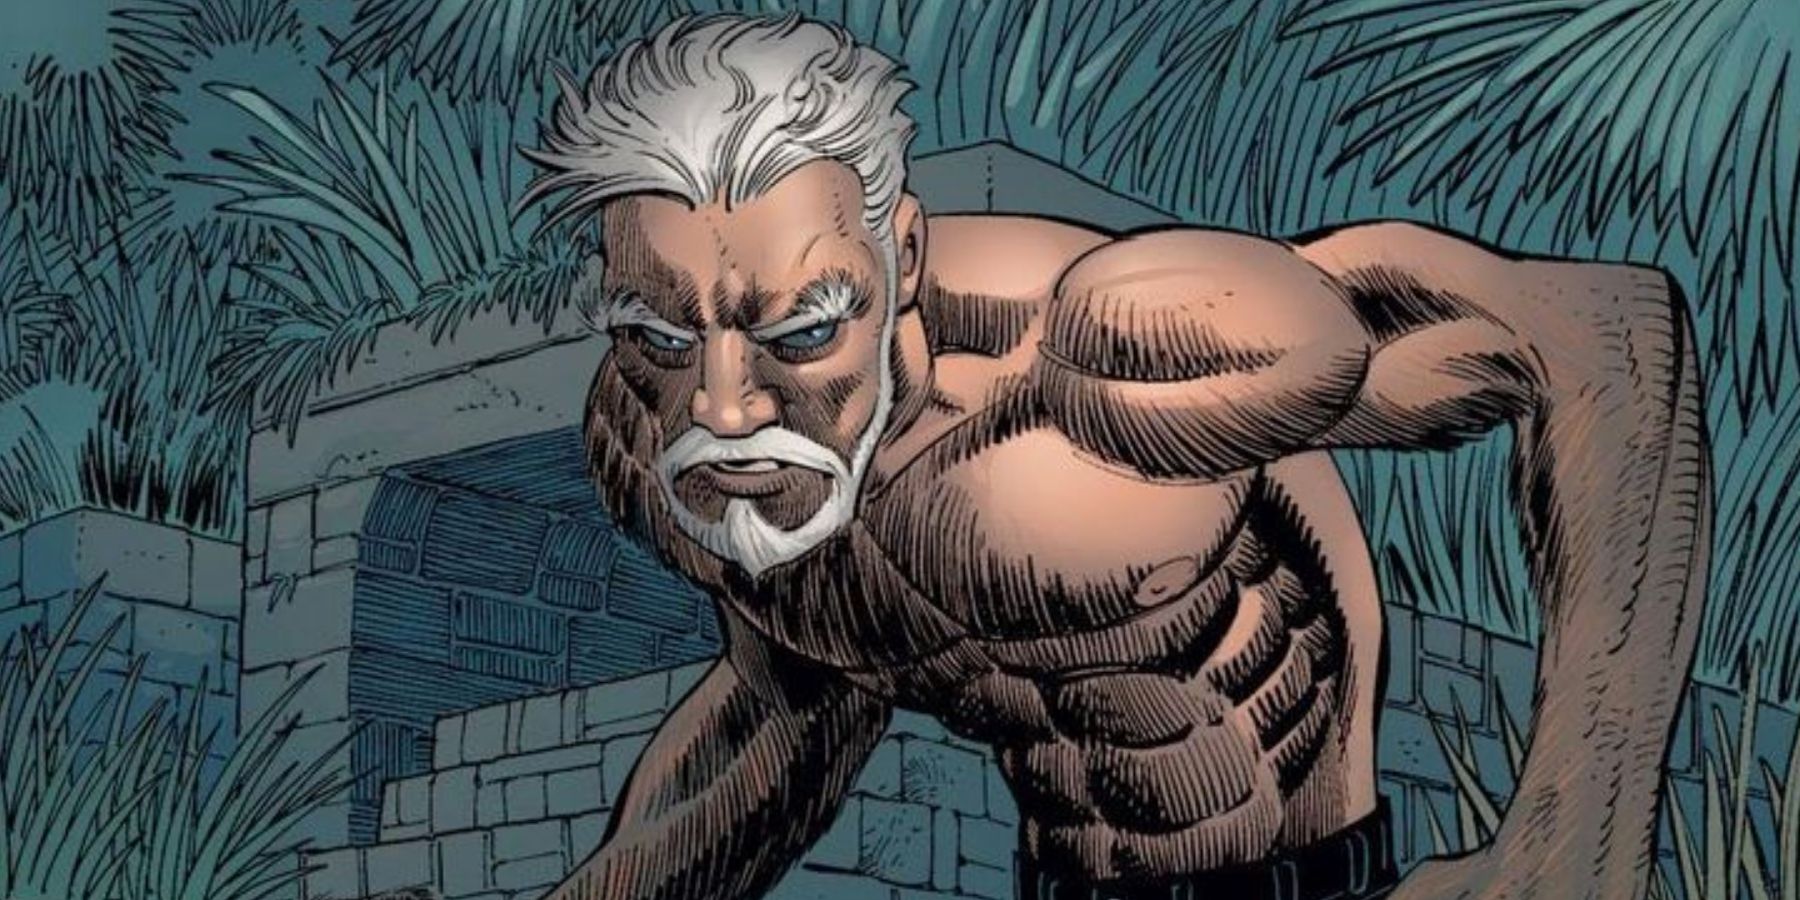 A shirtless Ezekiel Sims emerges from the jungle in Marvel Comics.